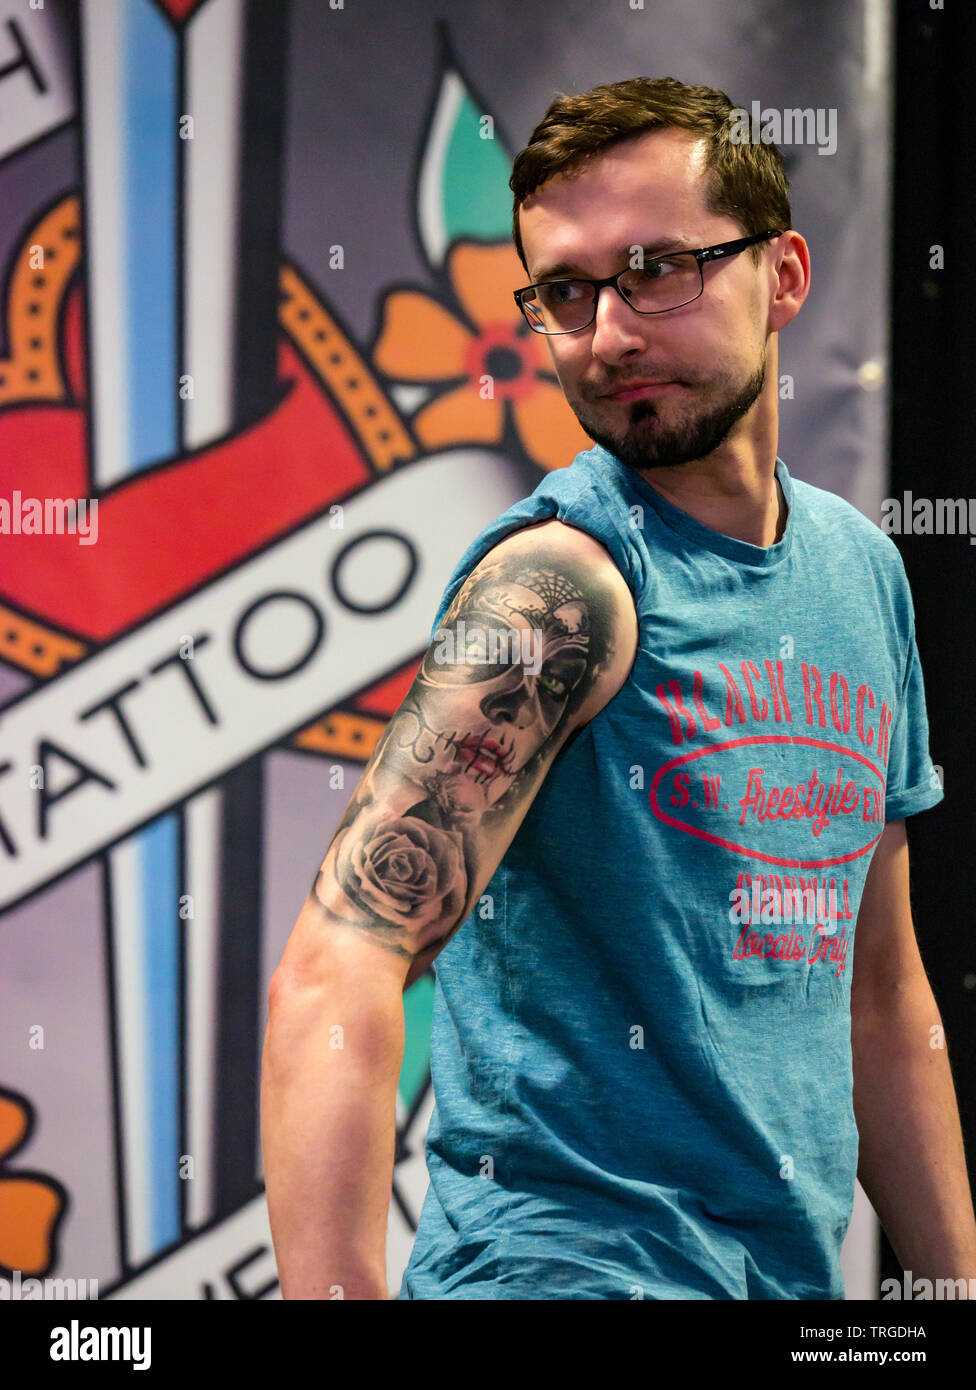 Corn Exchange, Edinburgh, Scotland, UK, 9th Annual Scottish Tattoo Convention:  A man shows off his arm tattoo in a tattoo competition Stock Photo